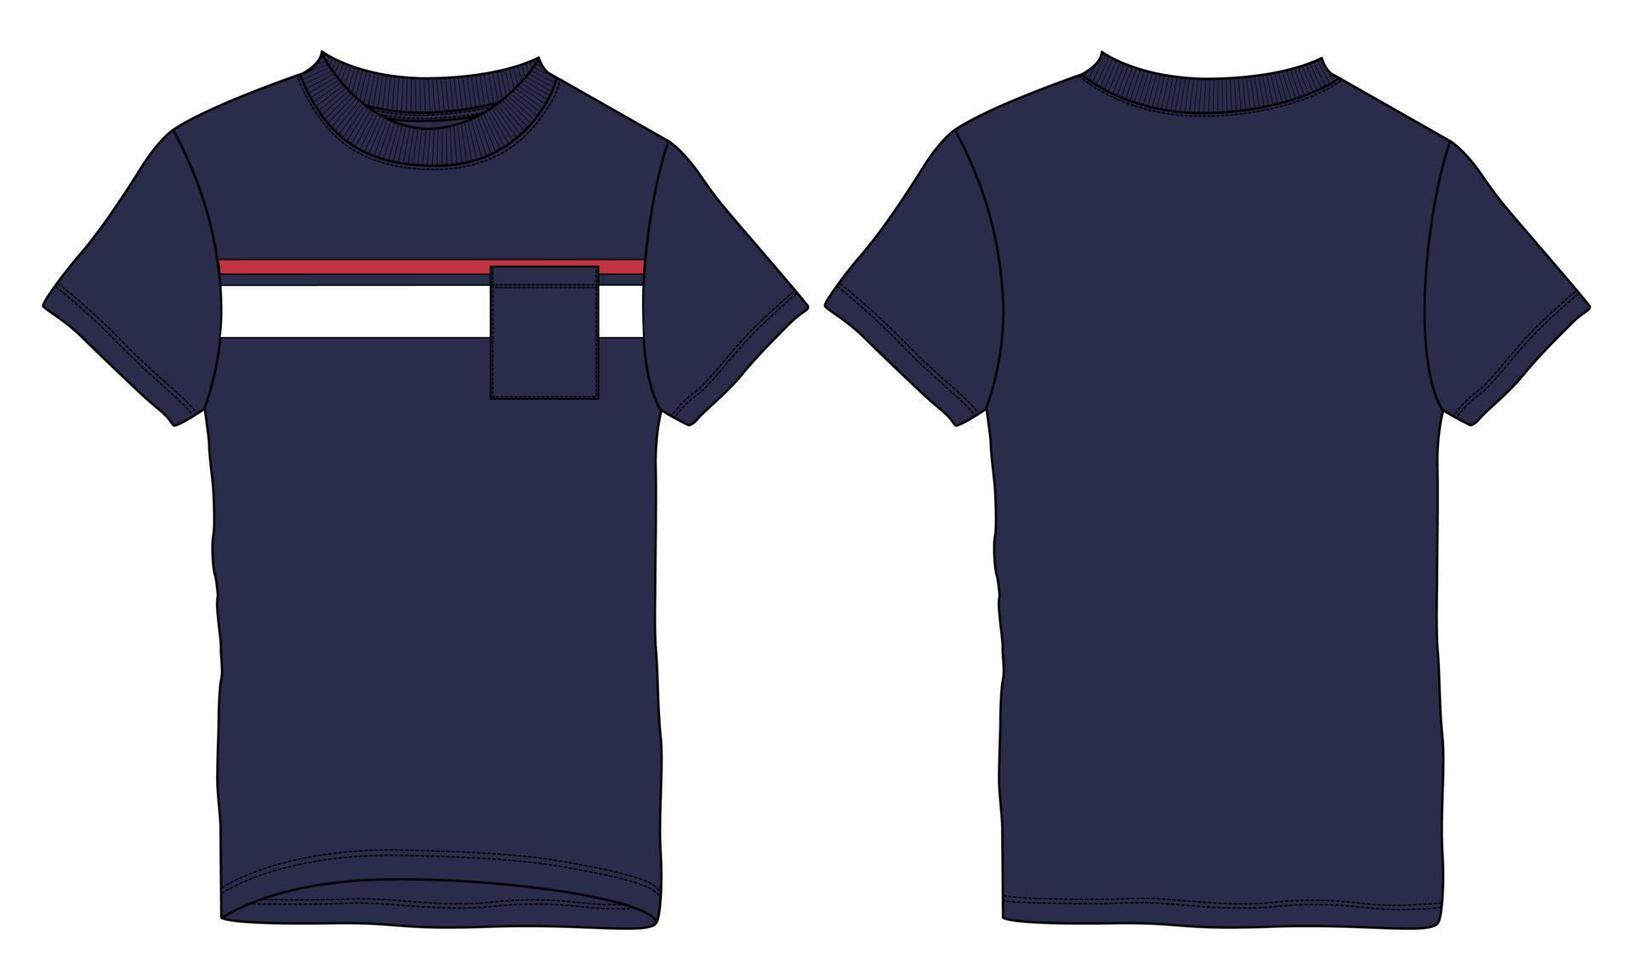 https://static.vecteezy.com/system/resources/previews/016/806/439/non_2x/regular-fit-short-sleeve-t-shirt-technical-with-chest-stripe-and-pocket-fashion-flat-sketch-template-front-and-back-view-free-vector.jpg